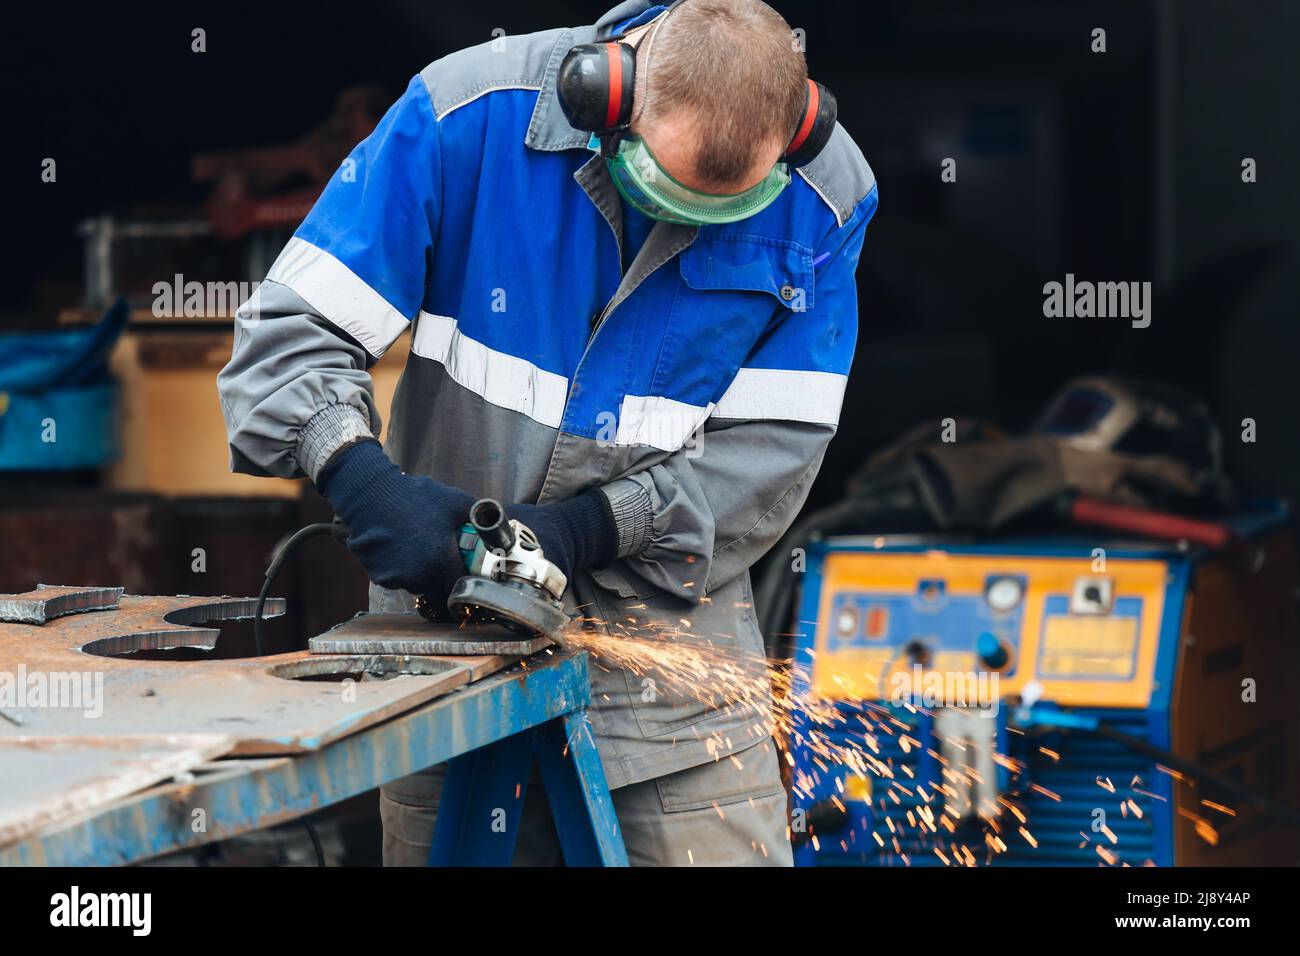 Real worker in working clothes grinds metal surface and sparks fly. Real portrait of person at work Stock Photo